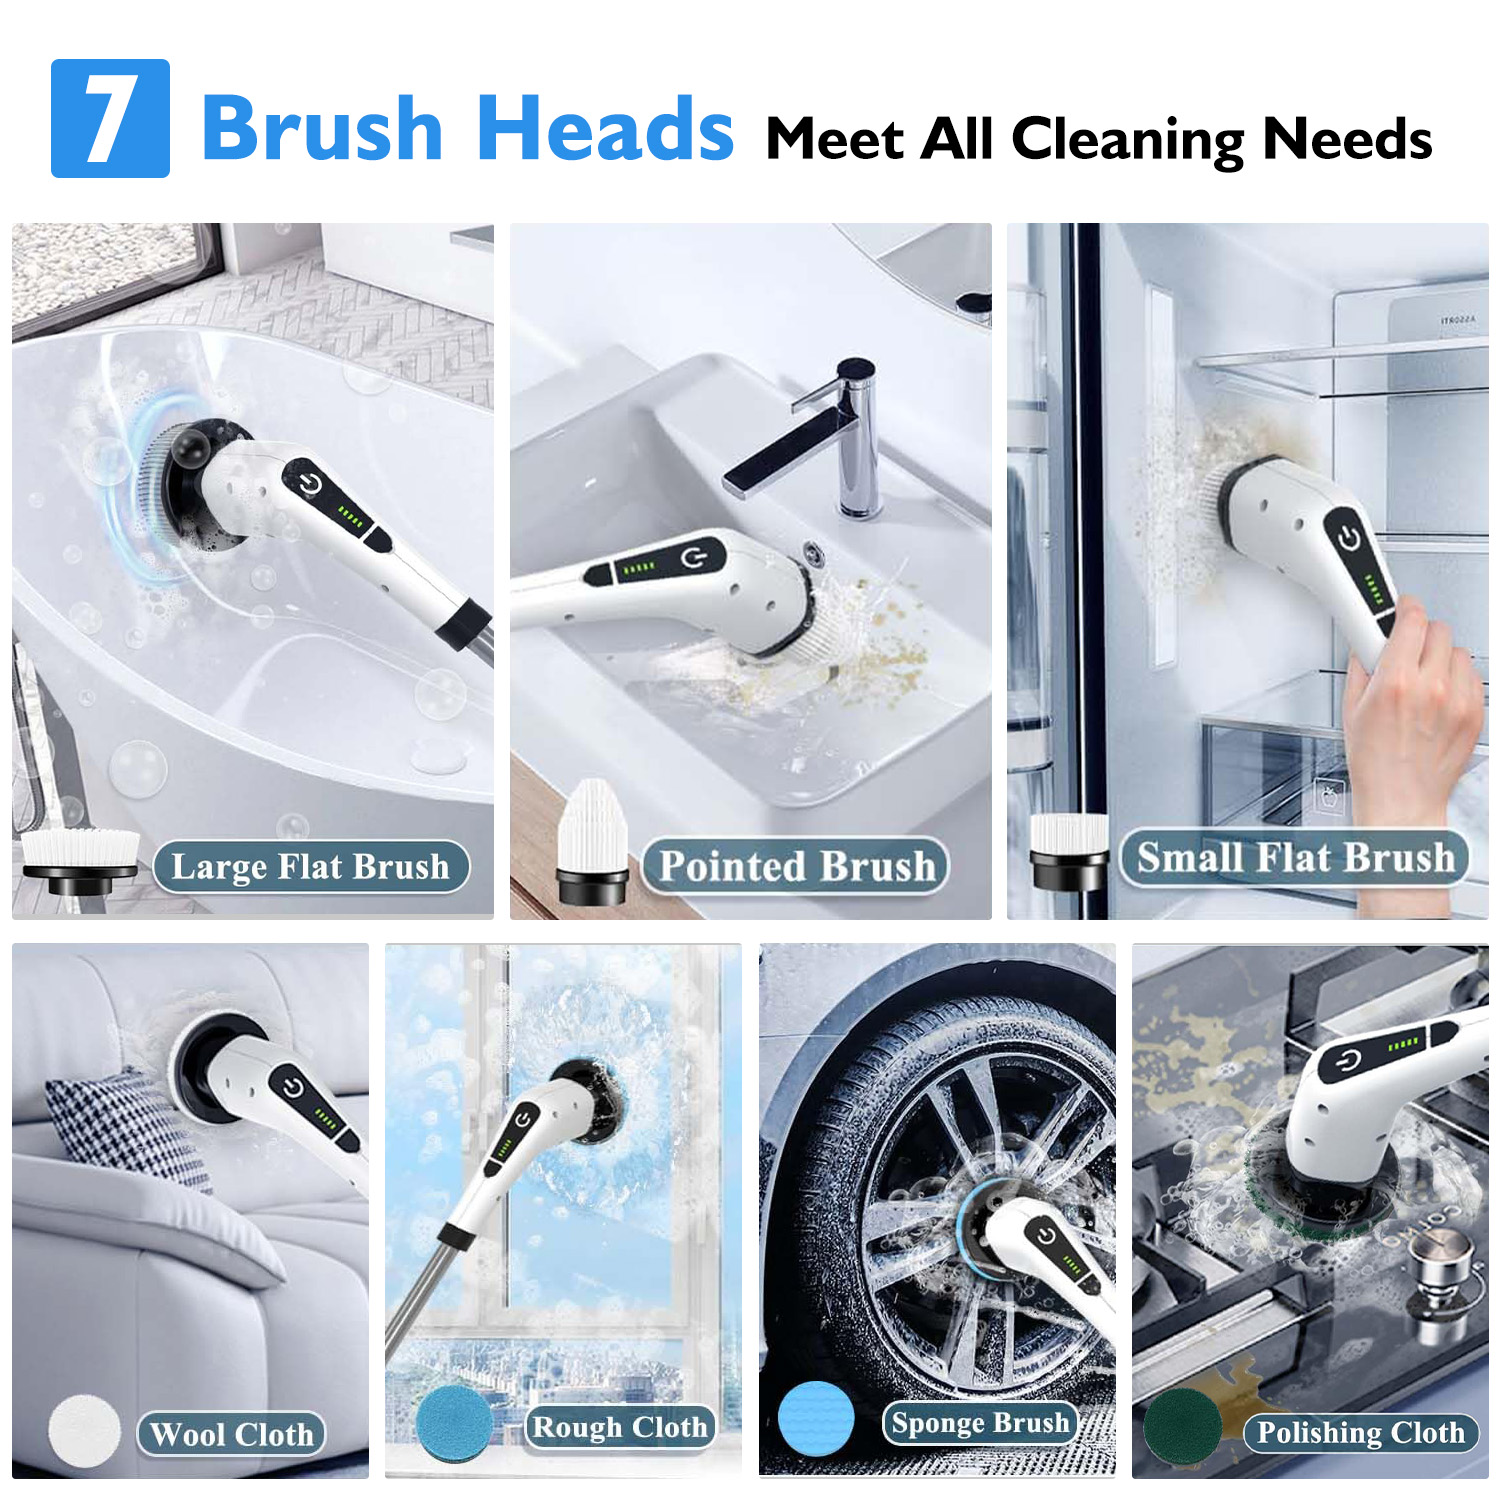 Electric Spin Scrubber, Cordless Bath Tub Power Scrubber with Long Handle & 7 Replaceable Heads, Detachable as Short Handle, Shower Cleaning Brush Household Tools for Bathroom & Tile Floor - image 4 of 12